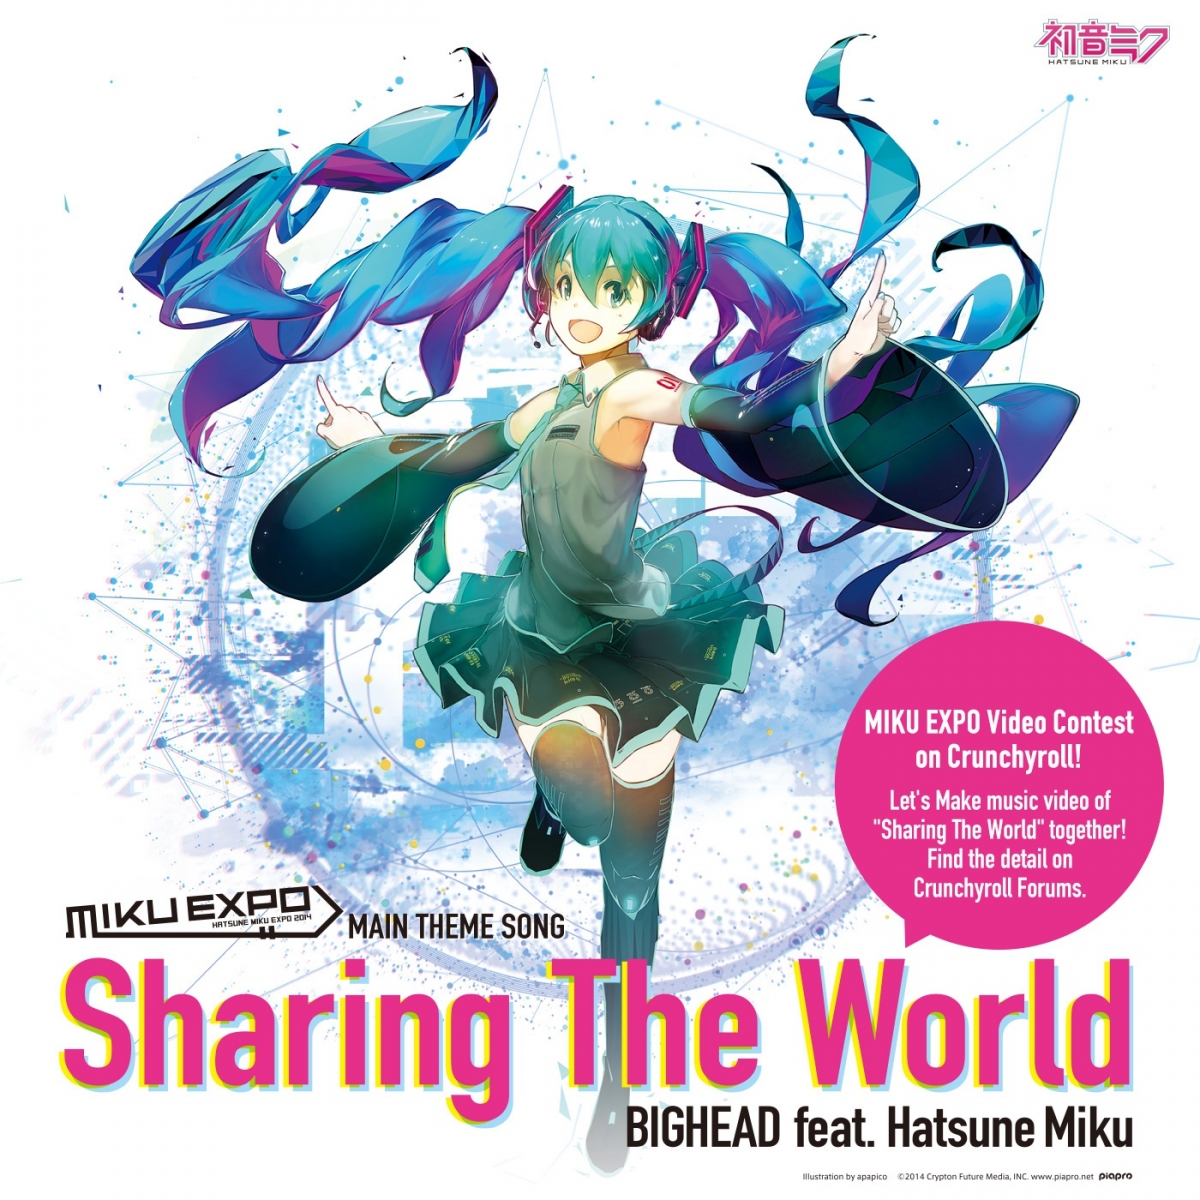 Join Hatsune Miku Expo CONTEST & Get Crunchyroll Exclusive Giveaway!